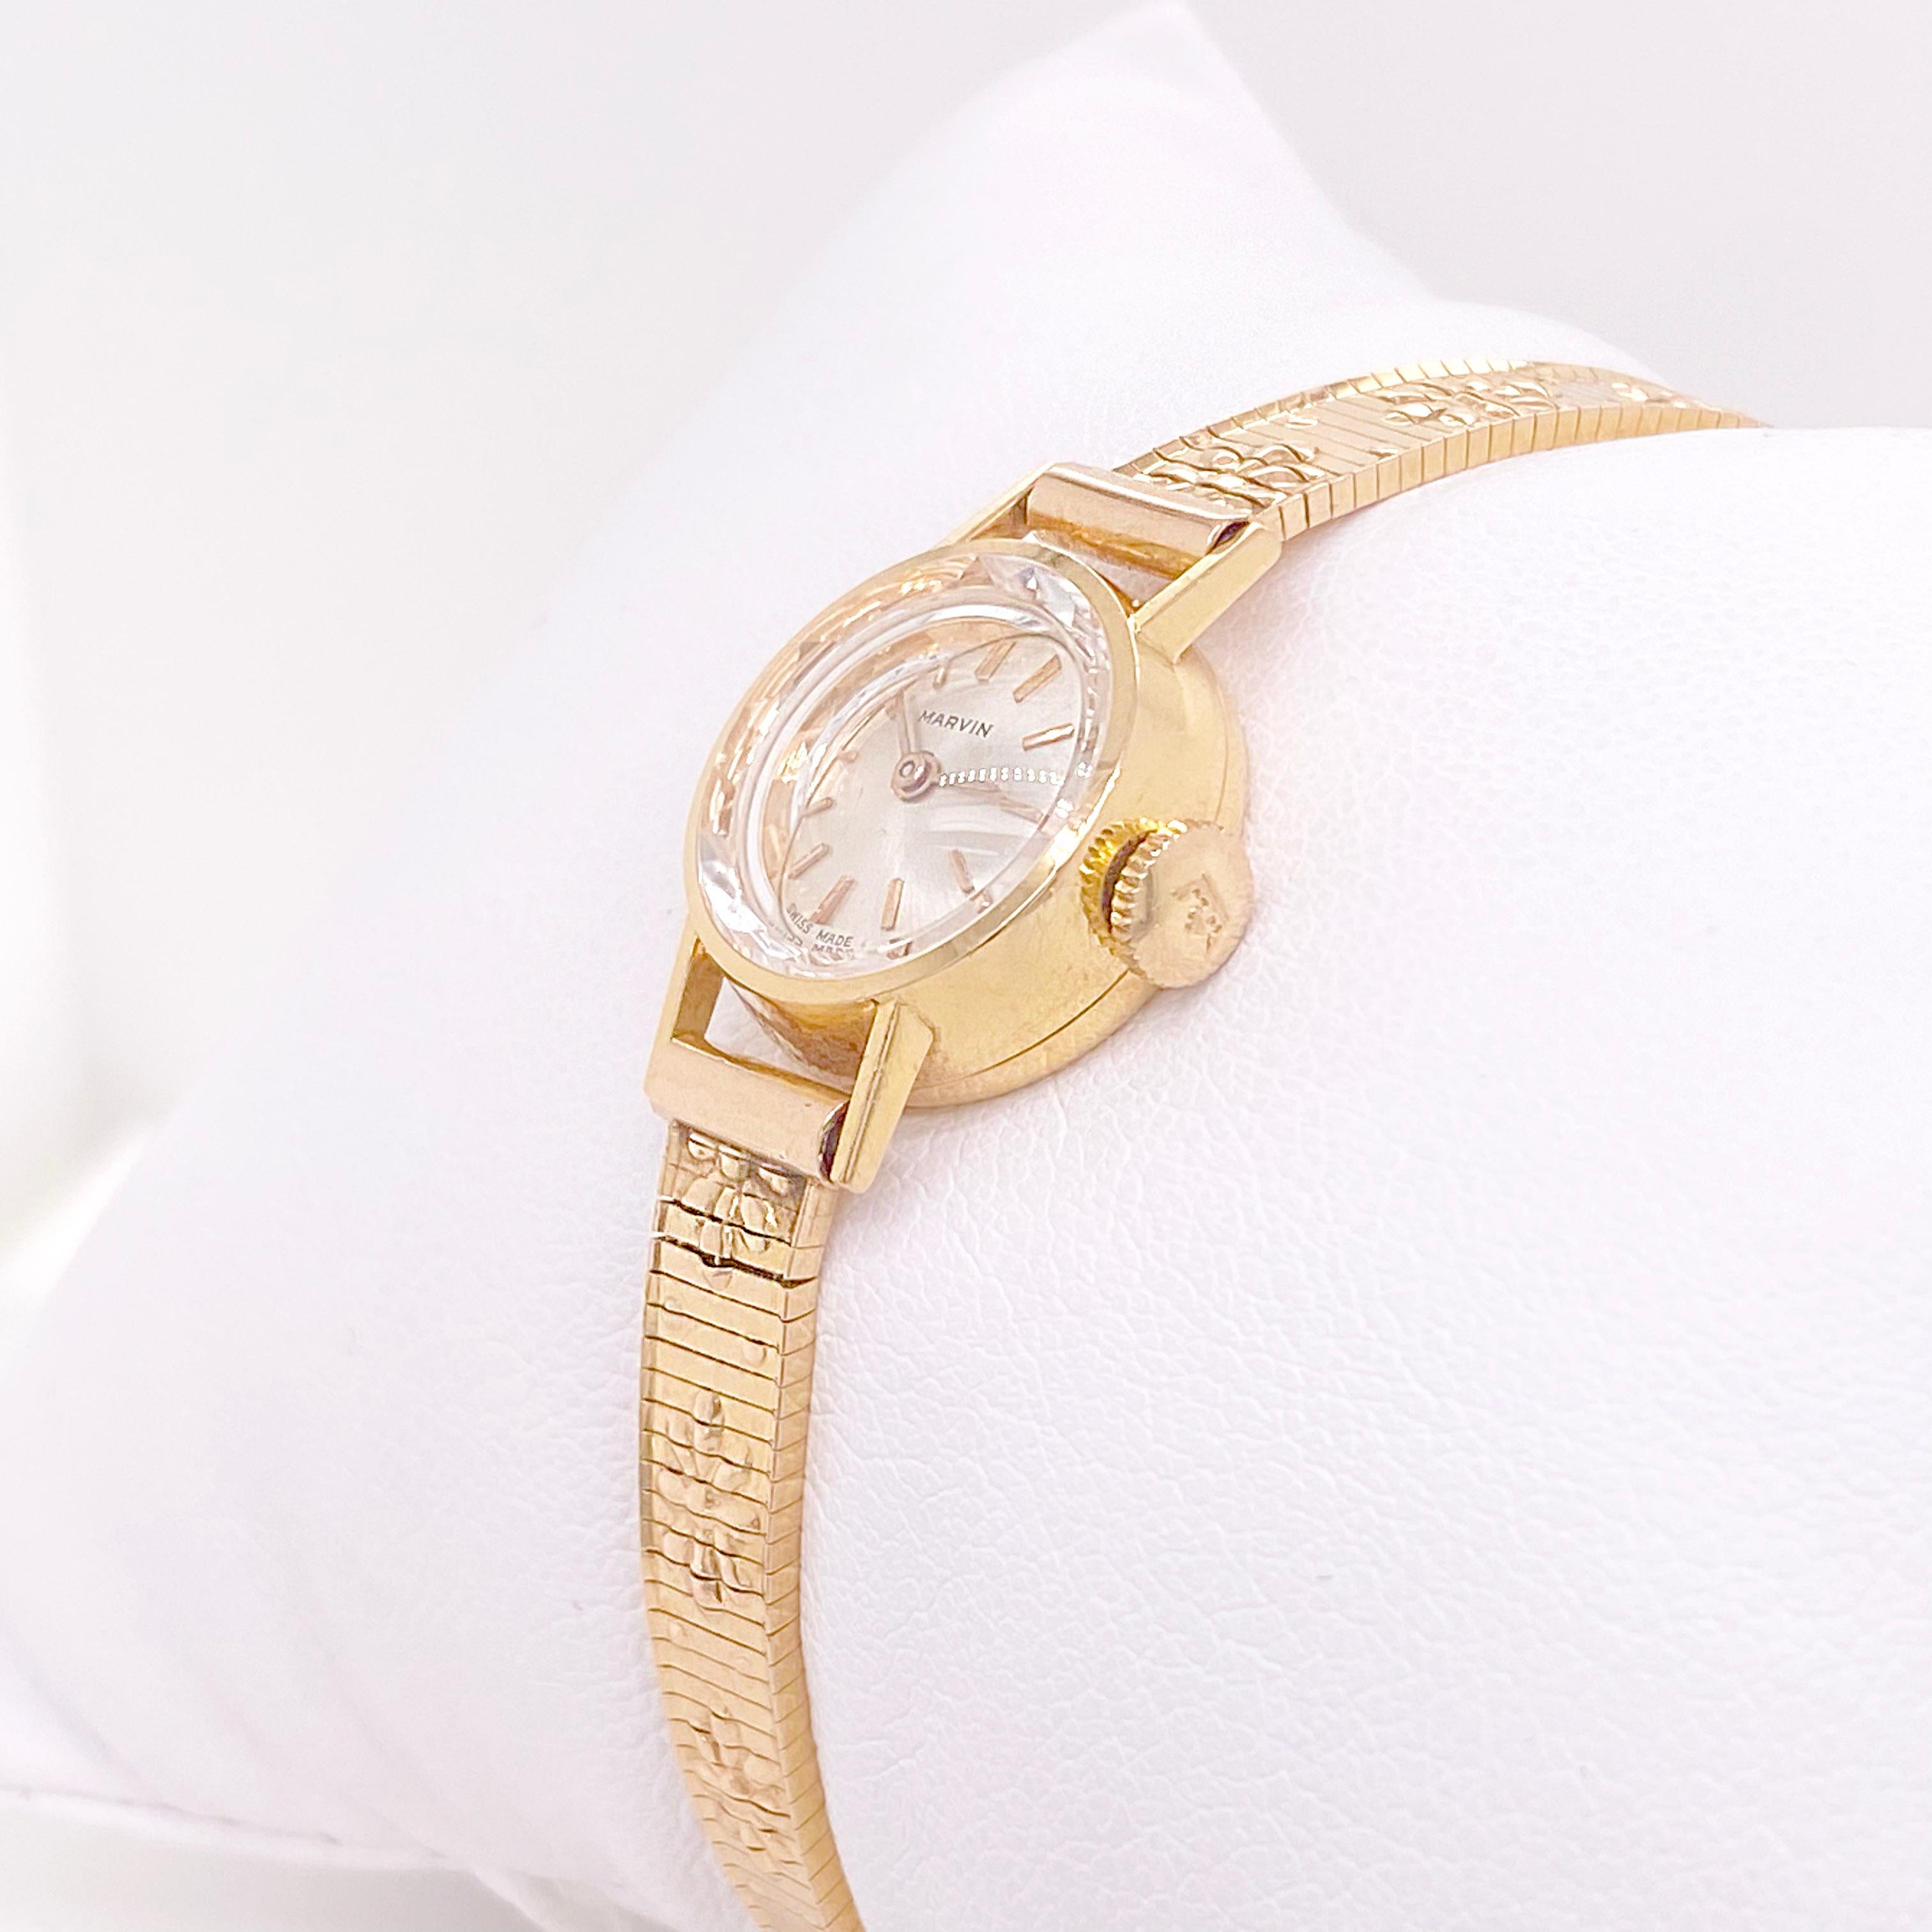 Ladies 14k yellow gold Marvin Watch-so feminine and rare! The small gold watch is the perfect addition is a delicate wrist with a gorgeous silver dial with 14 karat gold markers. The crystal has some gorgeous diamond cutting on it that makes it